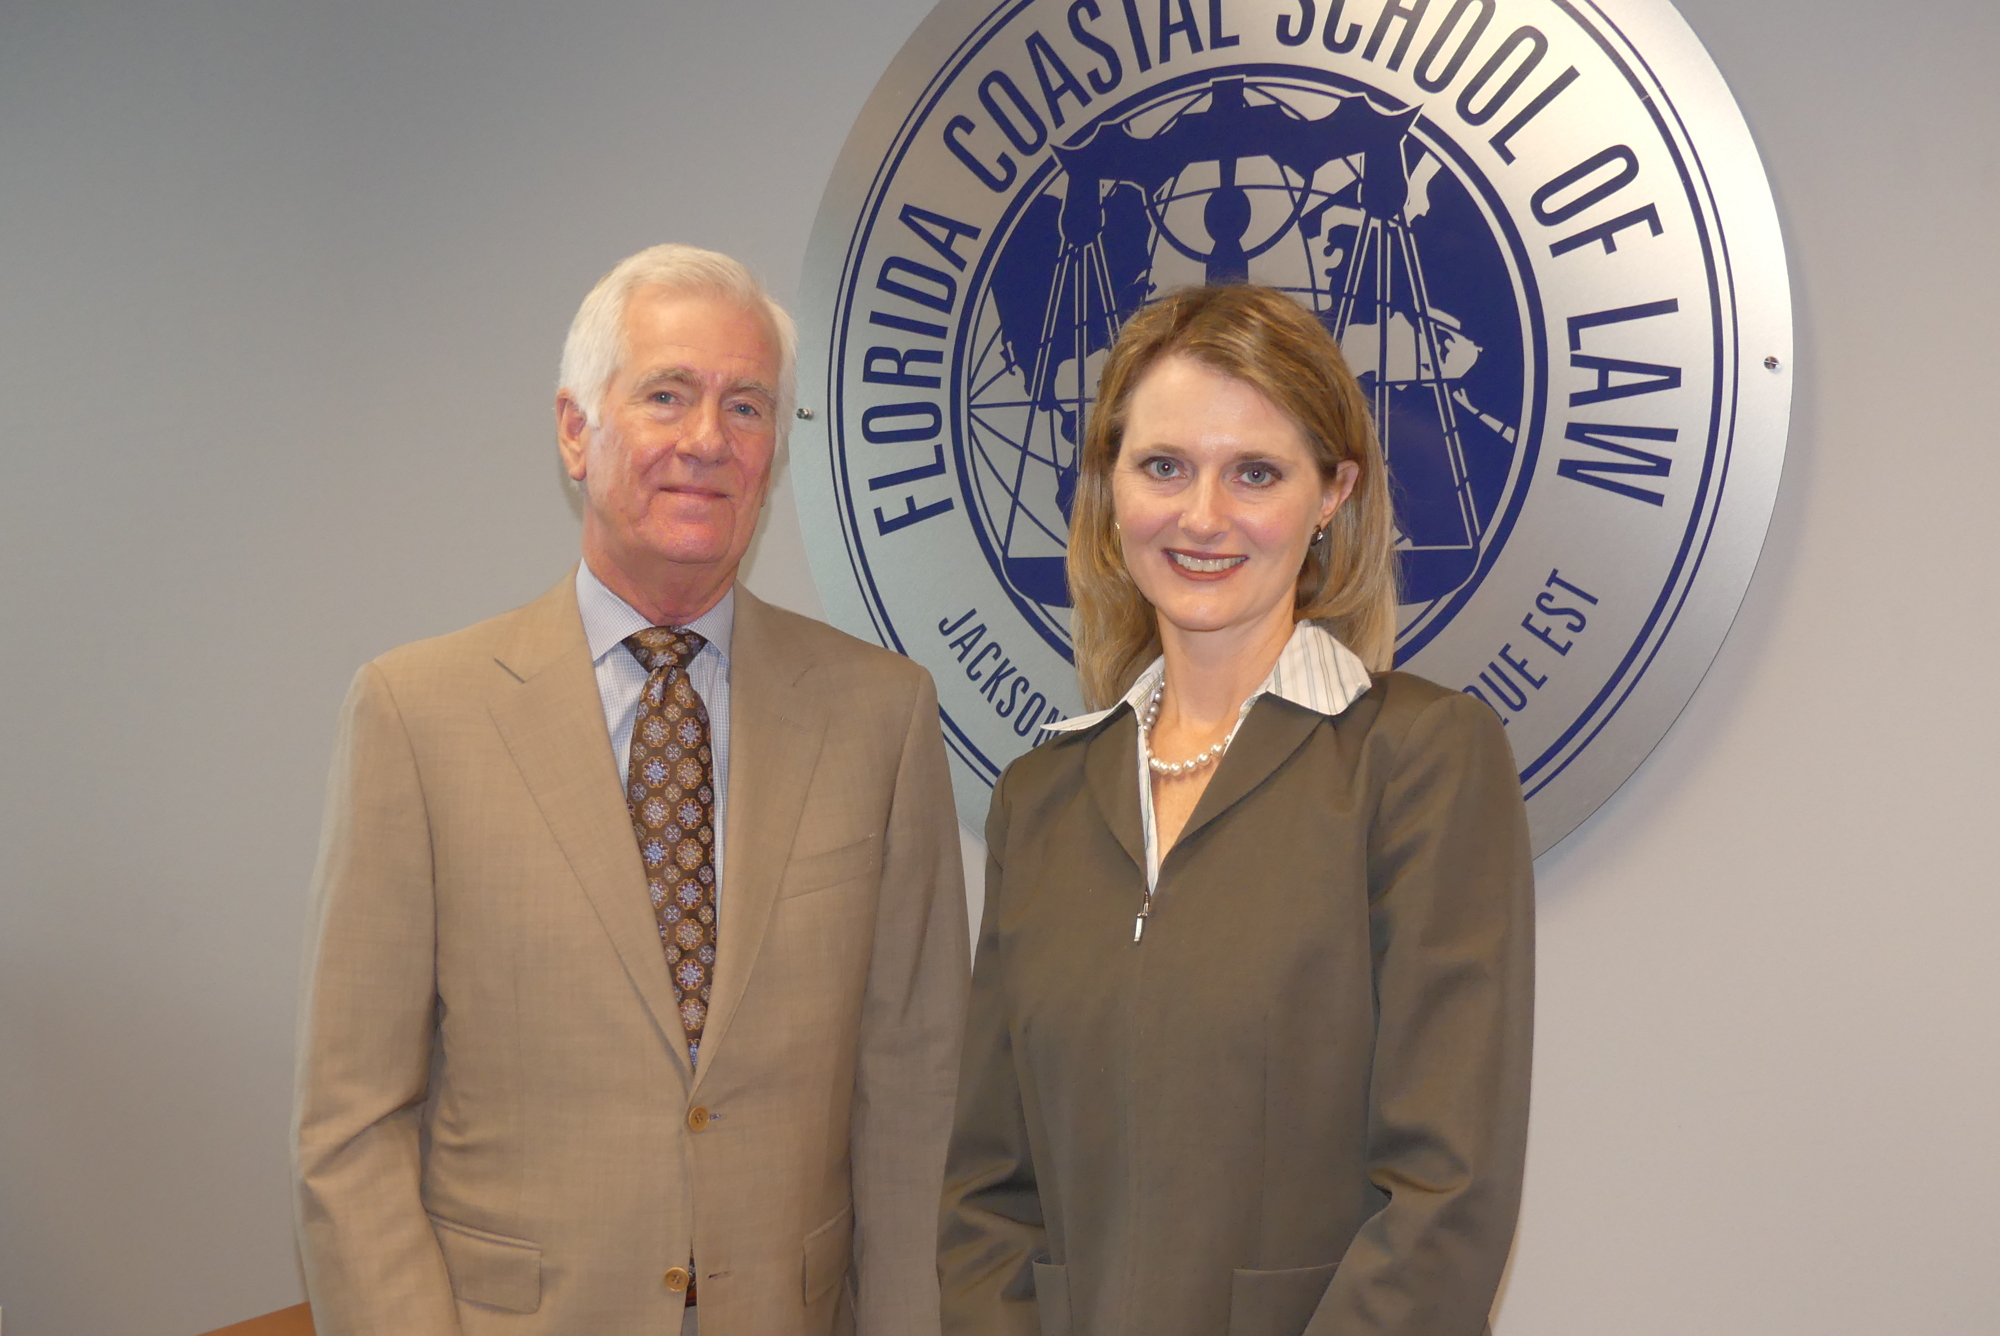 Florida Coastal School of Law President Peter Goplerud and Jennifer Reiber, interim dean, are working on a proposal to change the school’s tax status from for-profit to not-for-profit.